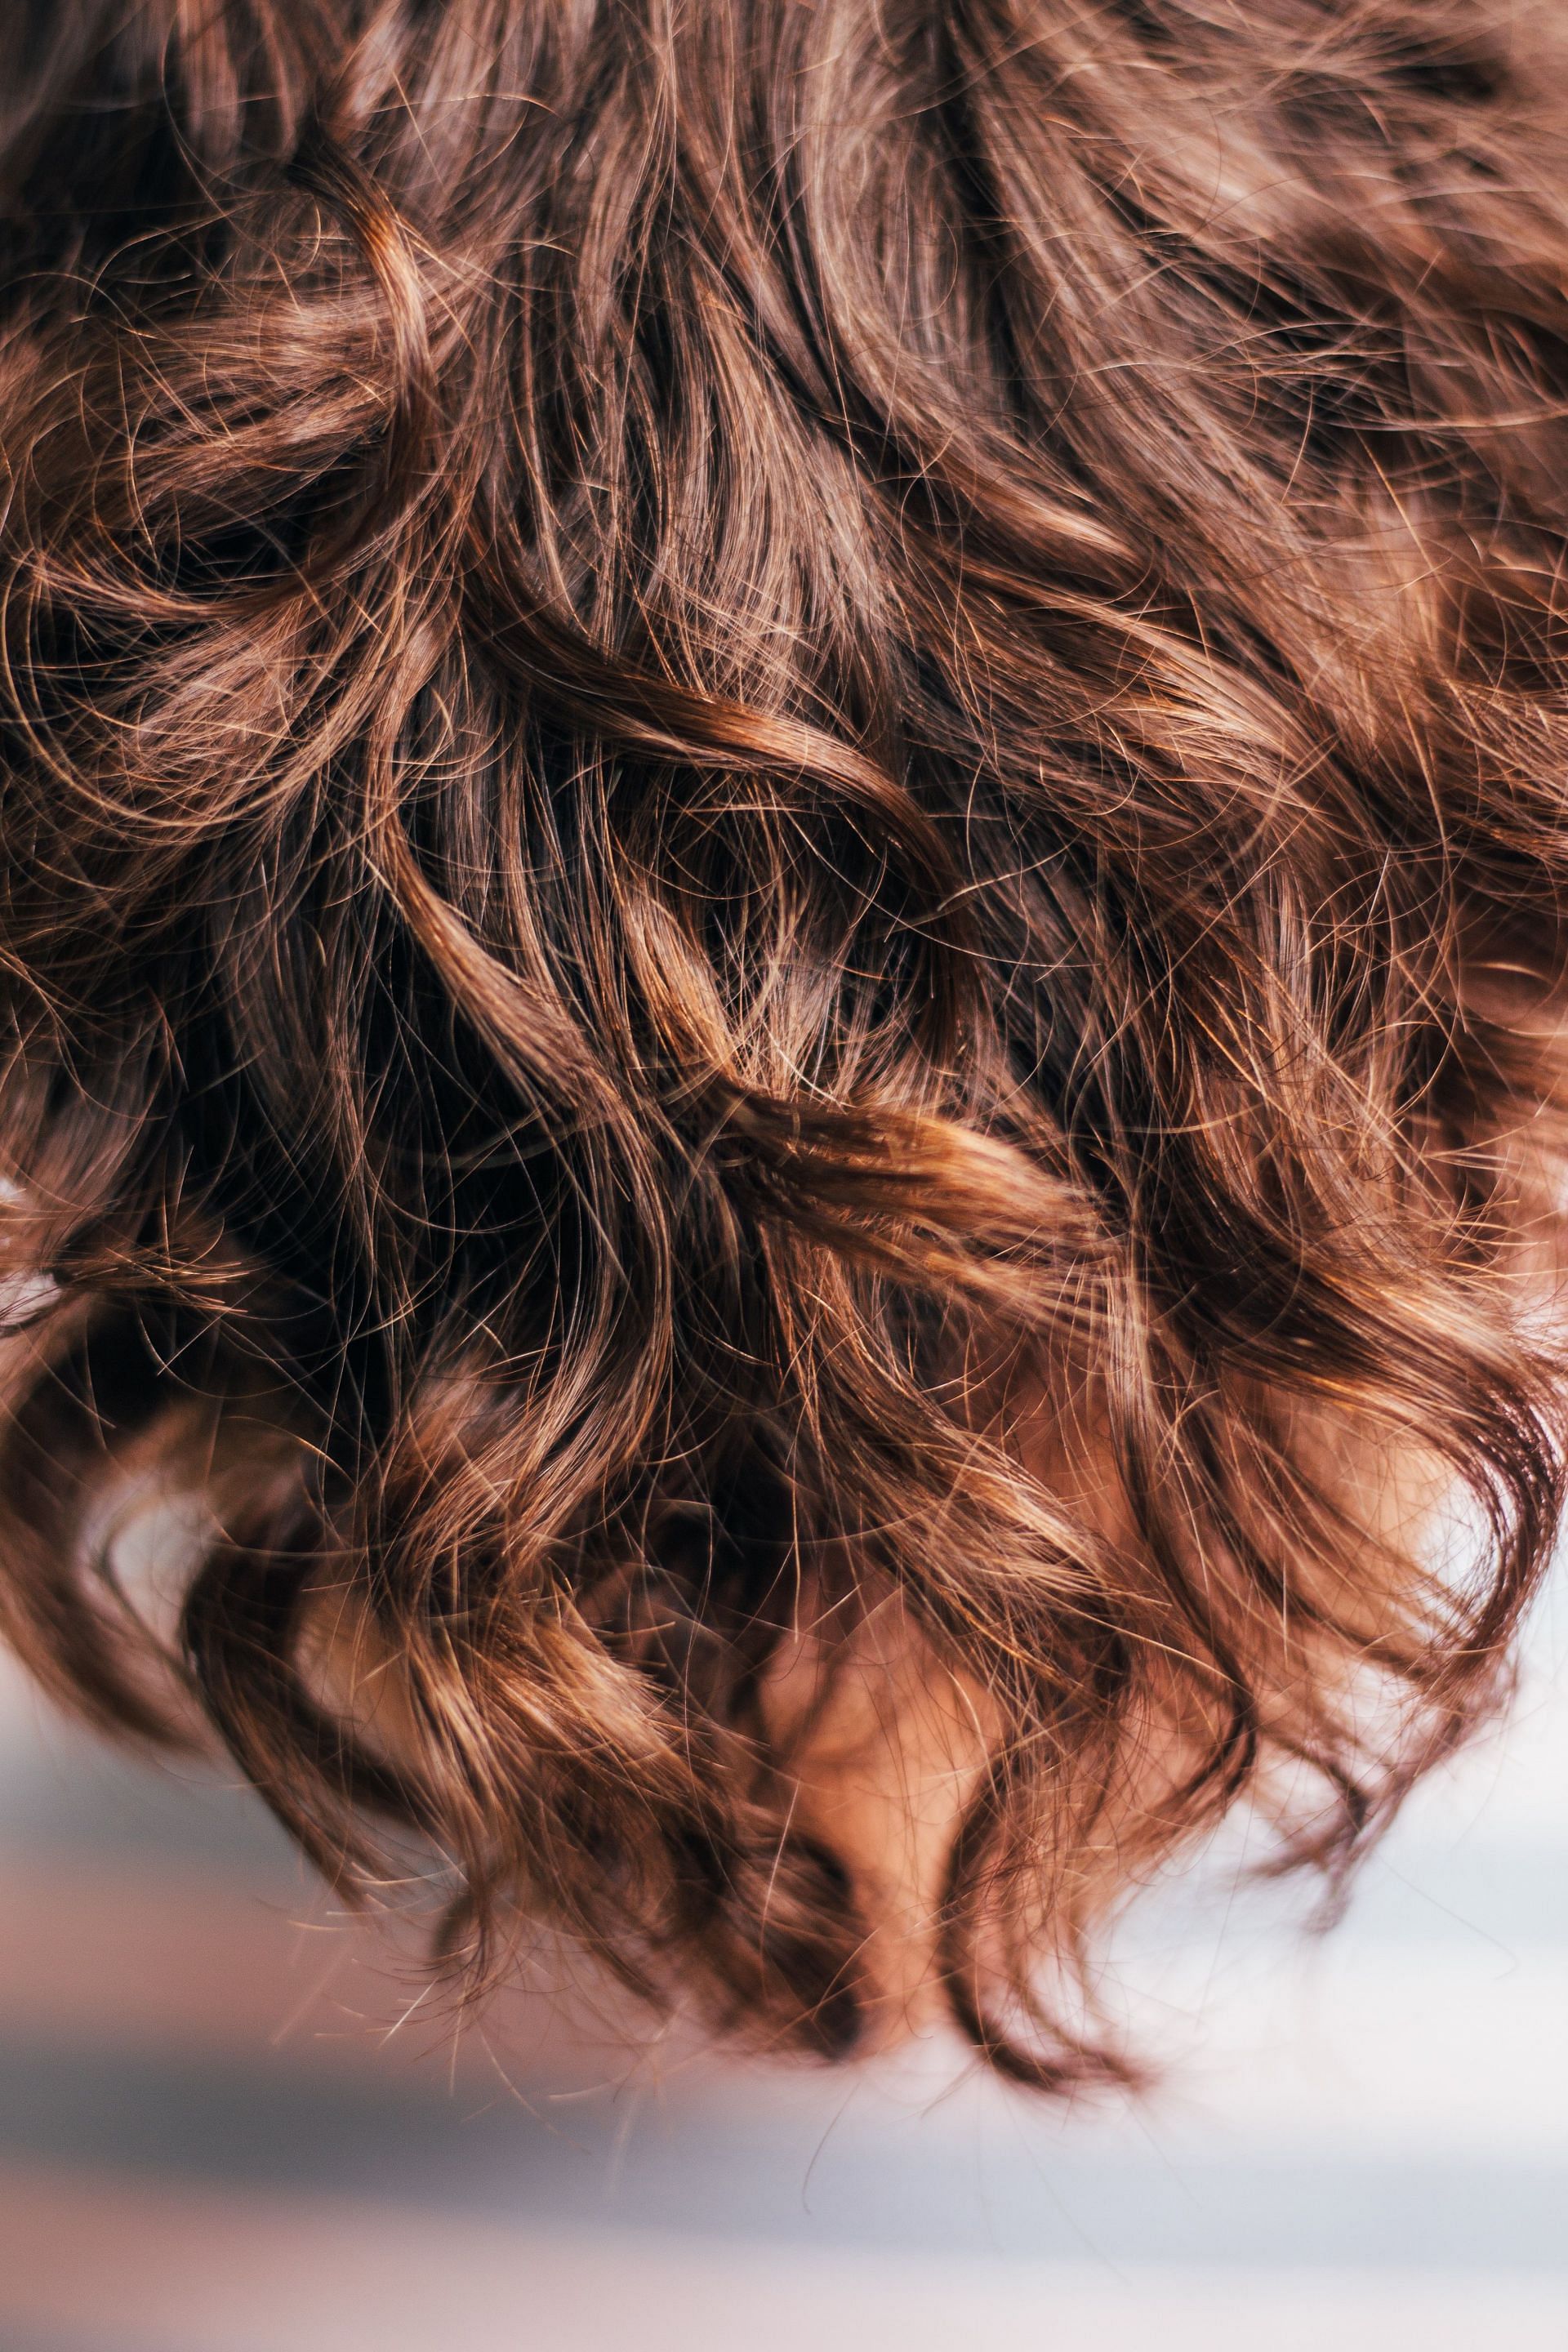 The Top 5 Hair Oils for Hair Growth and Thickness (Image via Pexels)